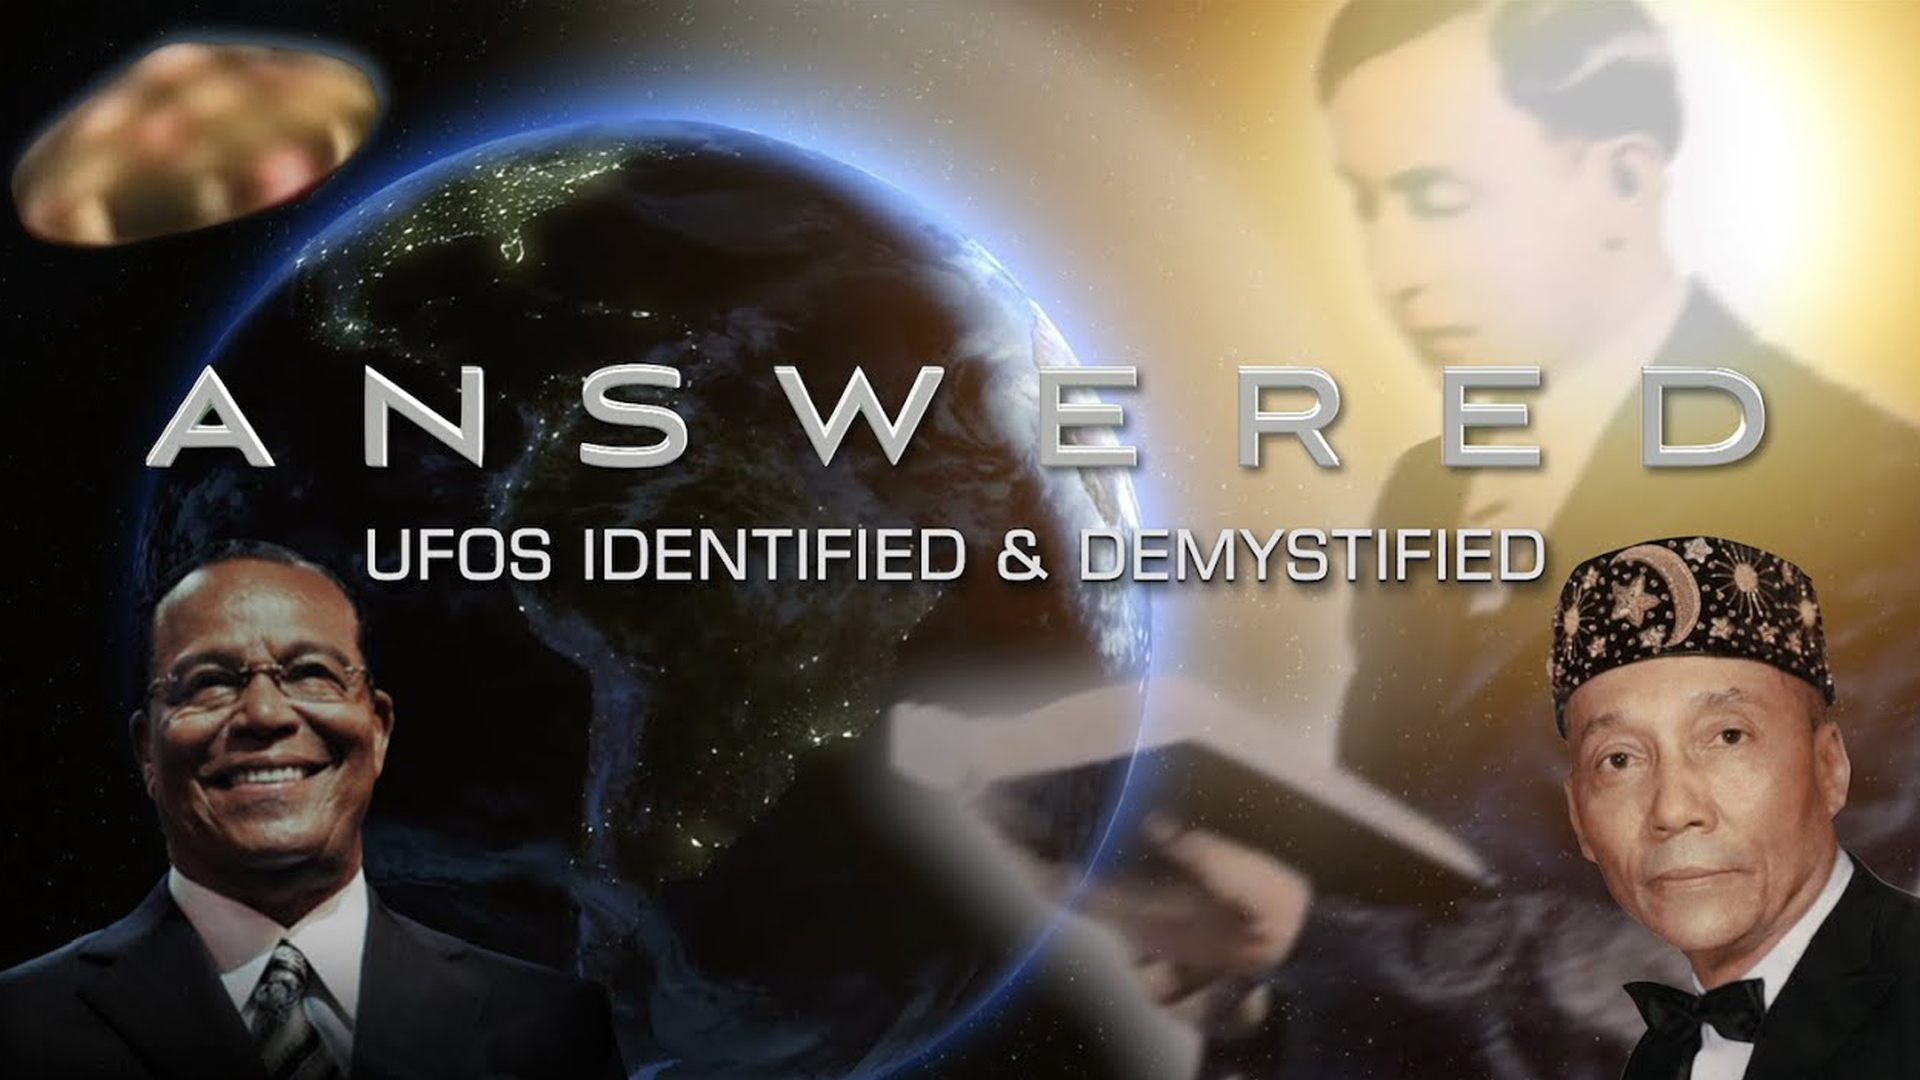 ANSWERED: UFOs Identified and Demystified Official Trailer